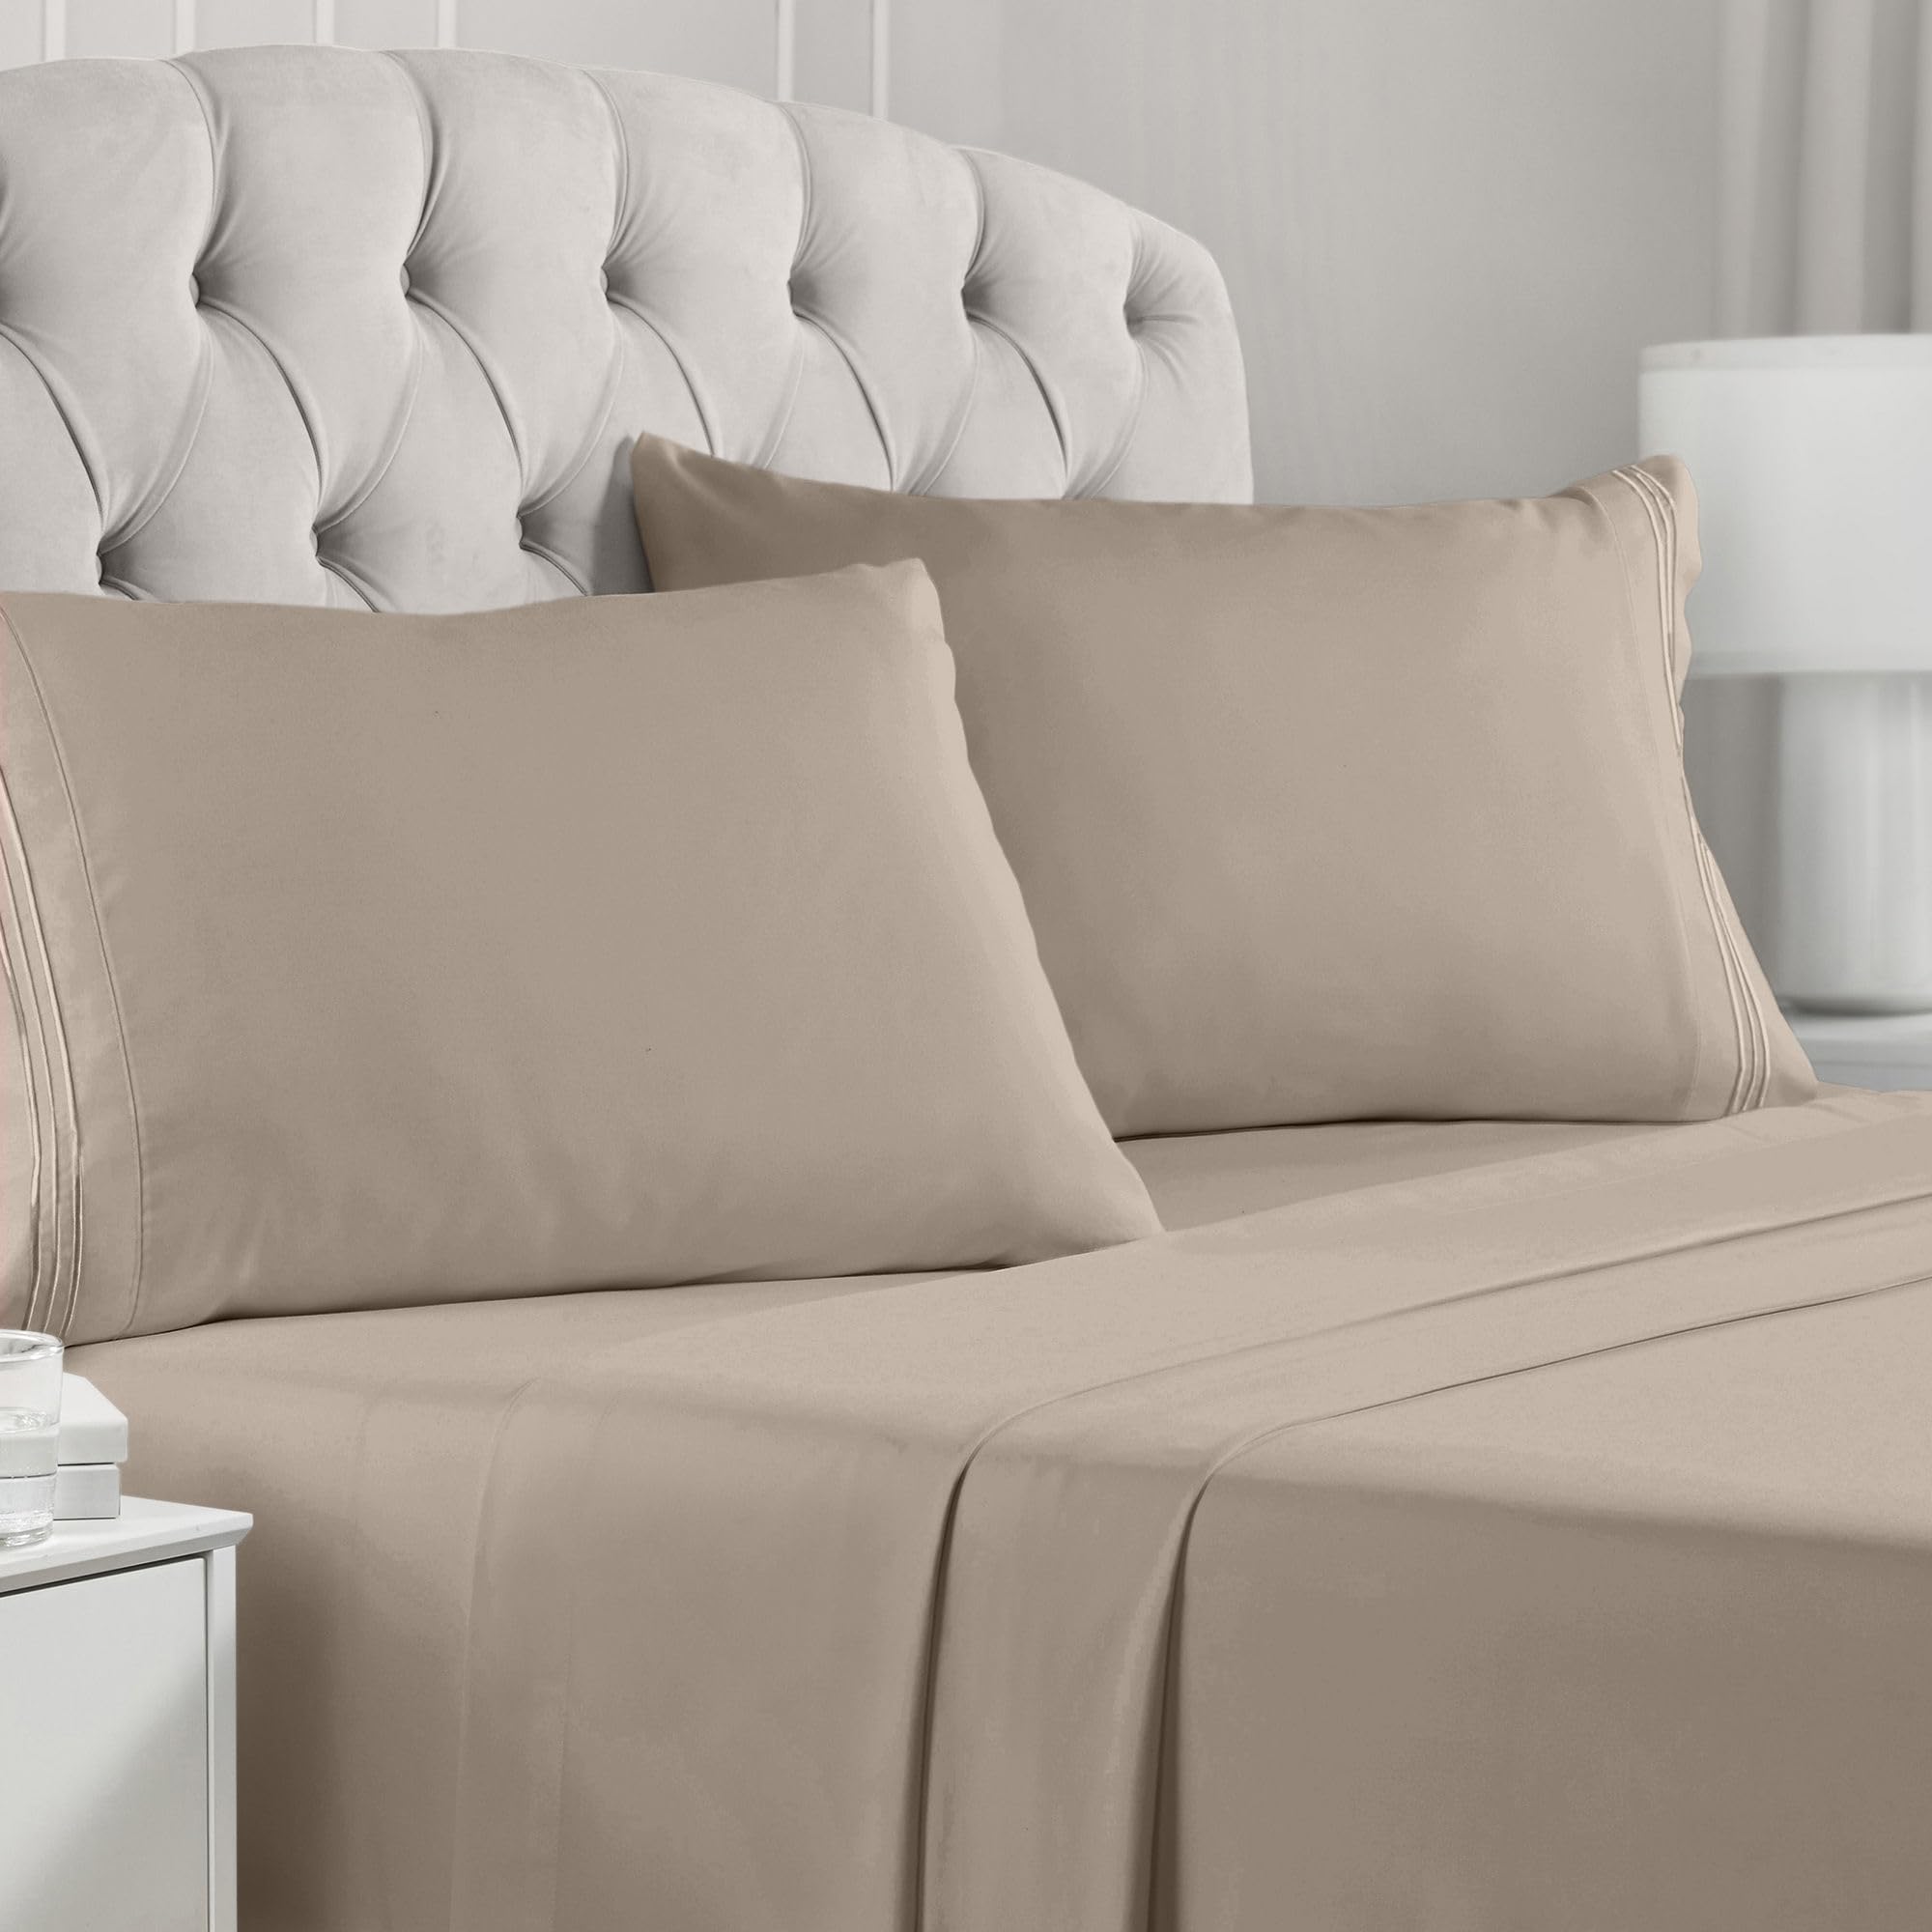 Book Cover Mellanni Queen Sheet Set - 4 Piece Iconic Collection Bedding Sheets & Pillowcases - Hotel Luxury, Extra Soft, Cooling Bed Sheets - Deep Pocket up to 16